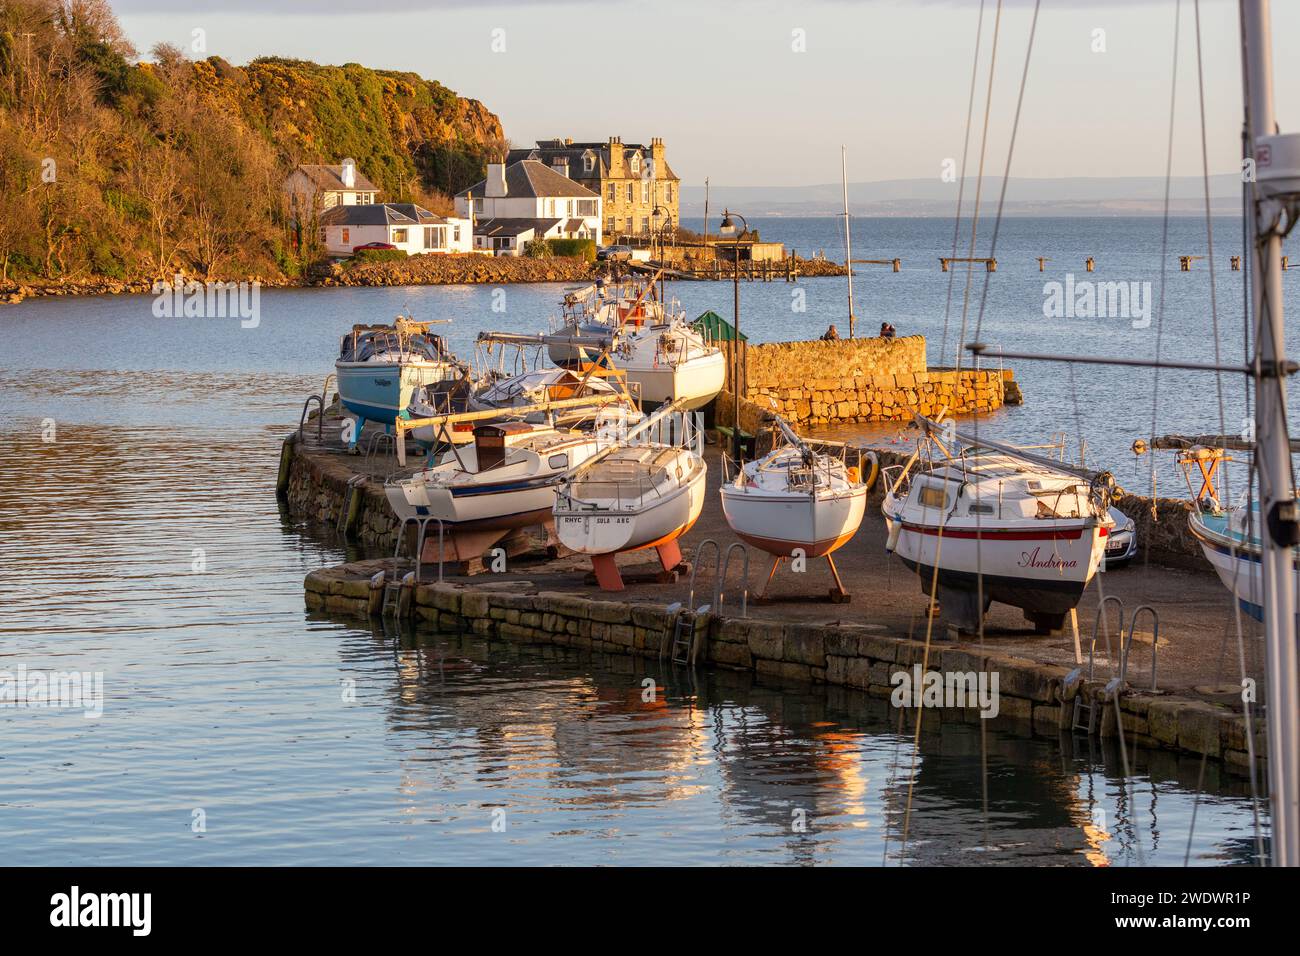 Yachts on the seawall in Aberdour Fife Stock Photo